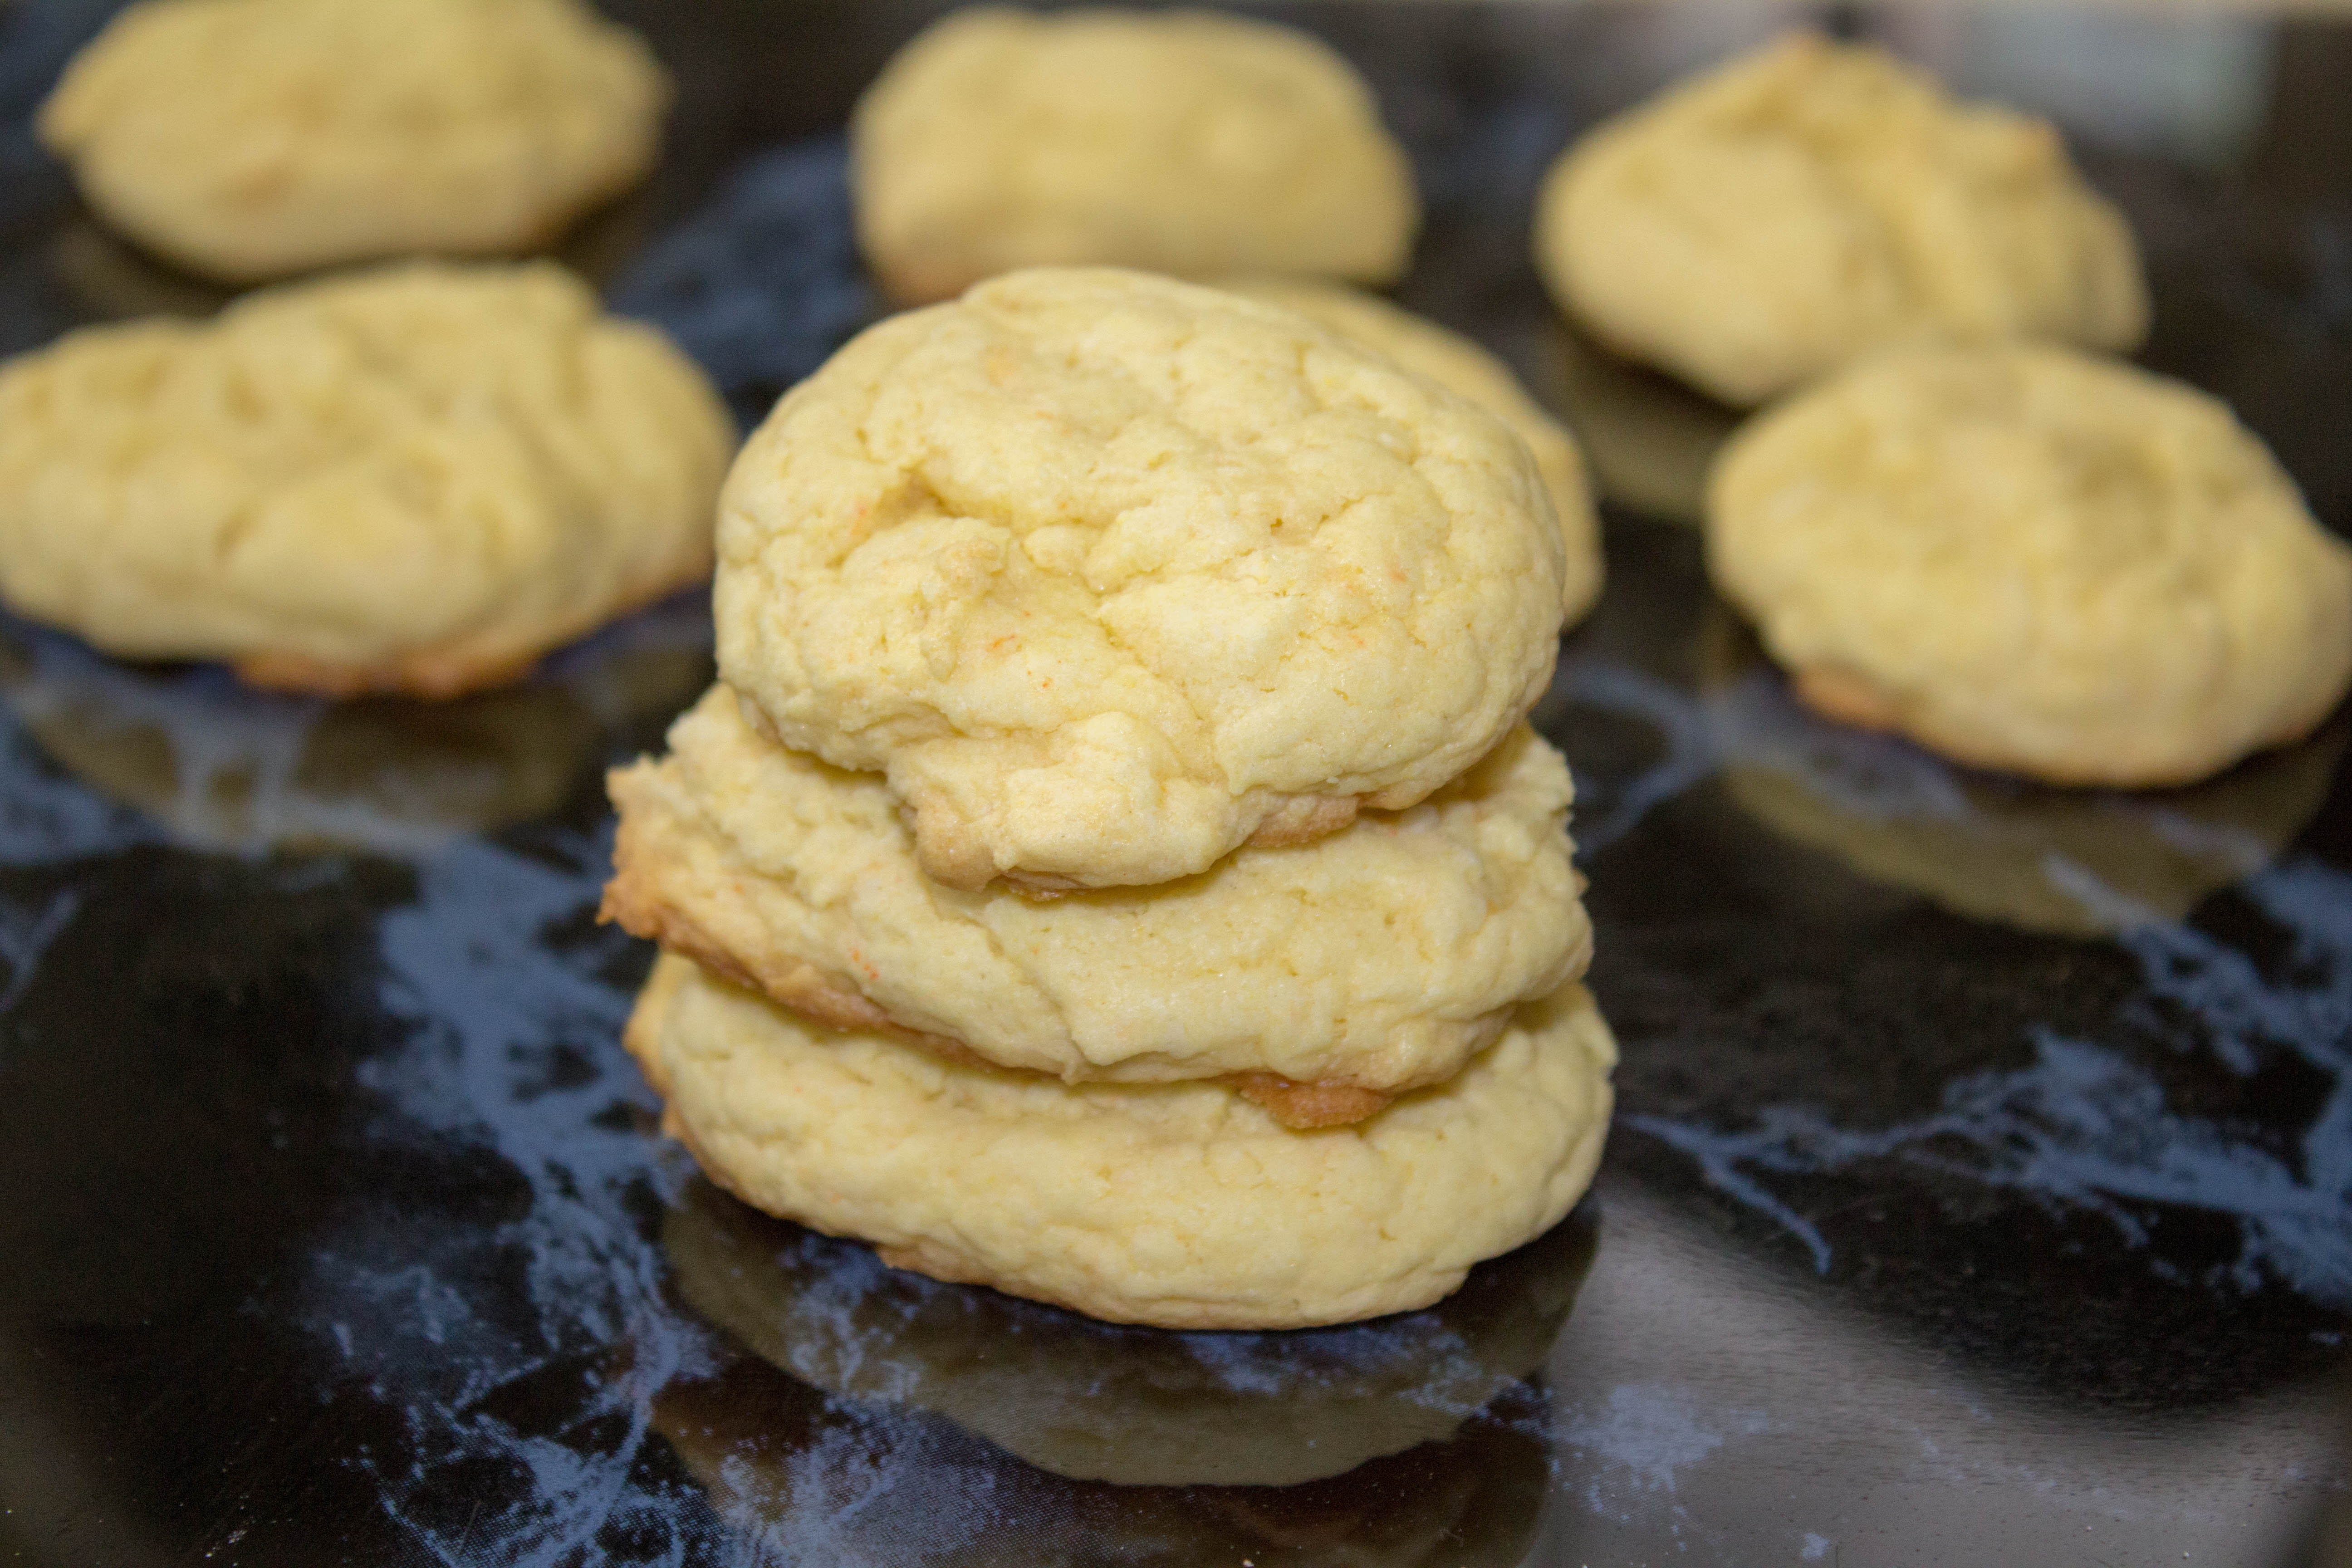 Cake mix cookies are a fast dessert that can be made easily with only 3 ingredients. Easy to make cookies that can be made in a lot of different flavors.